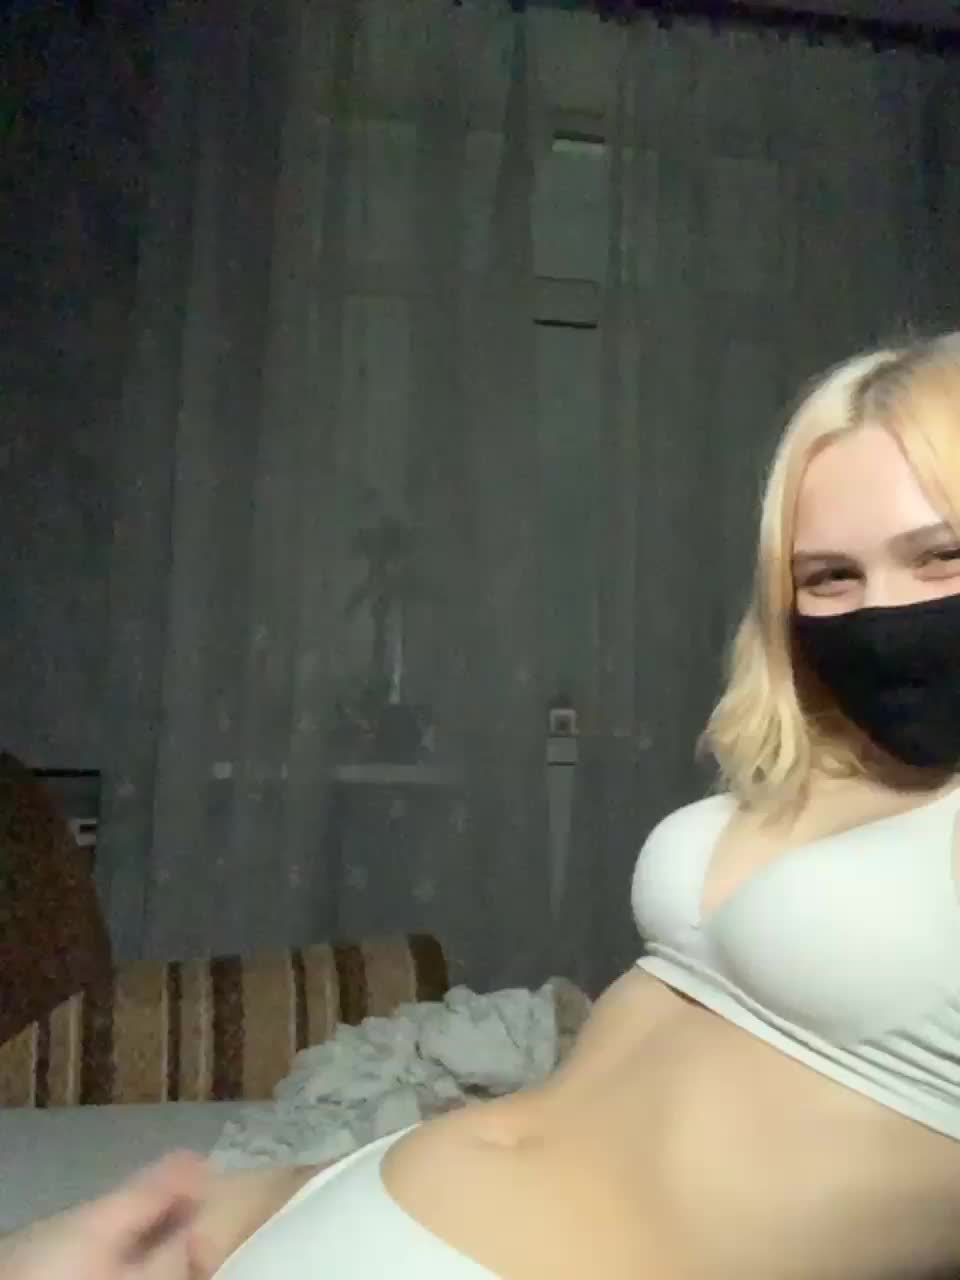 View or download file likillmeow on 2023-03-16 from bongacams